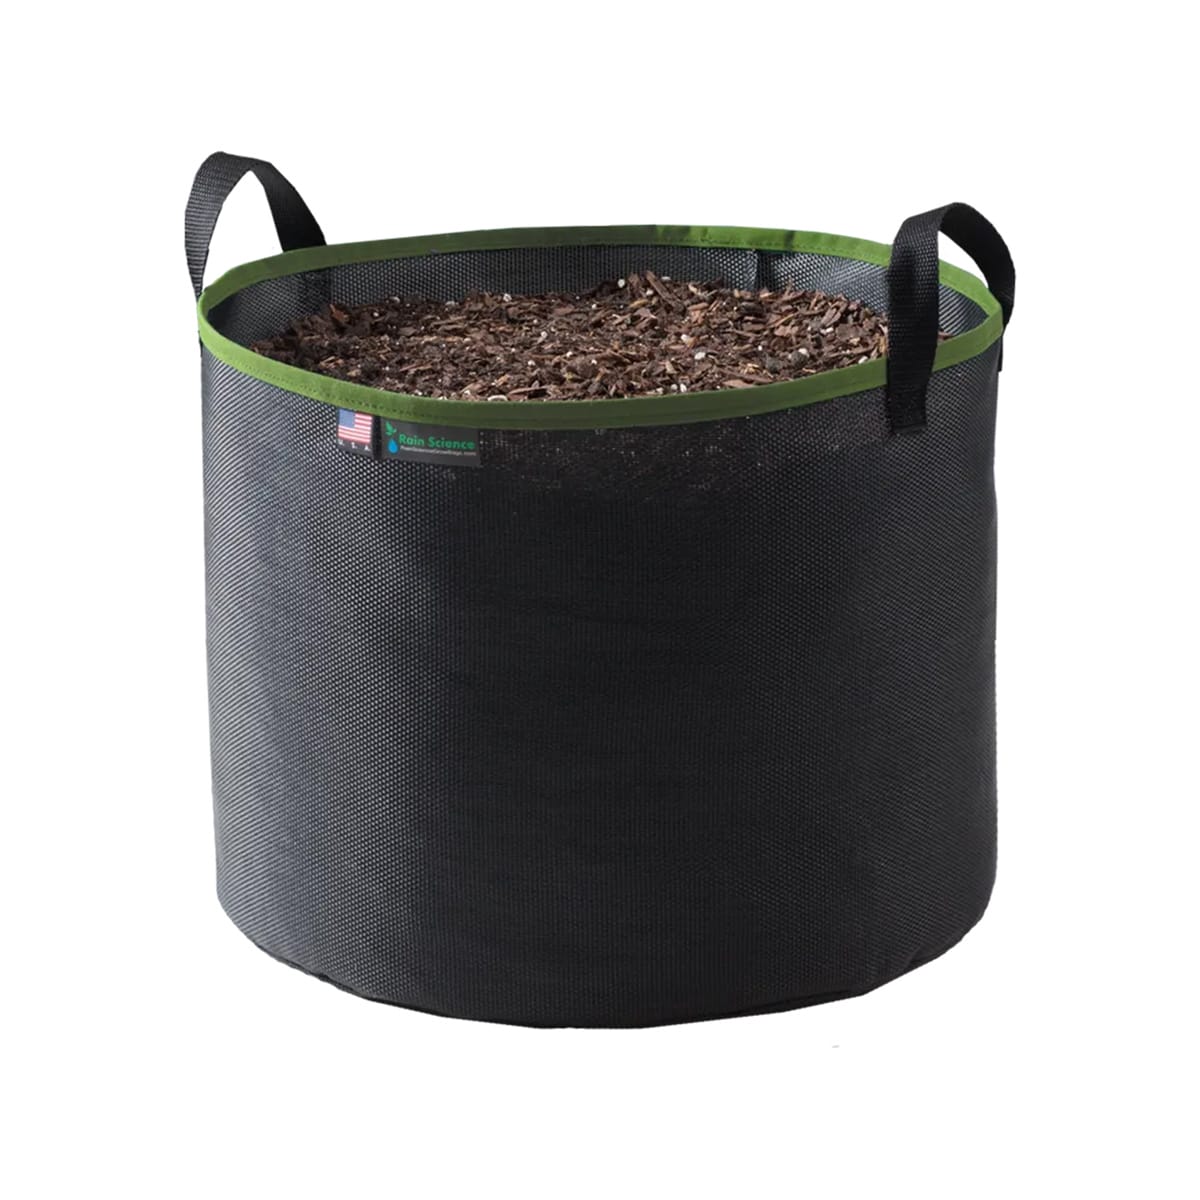 Green Plastic Grow Bags, For Growing Plants